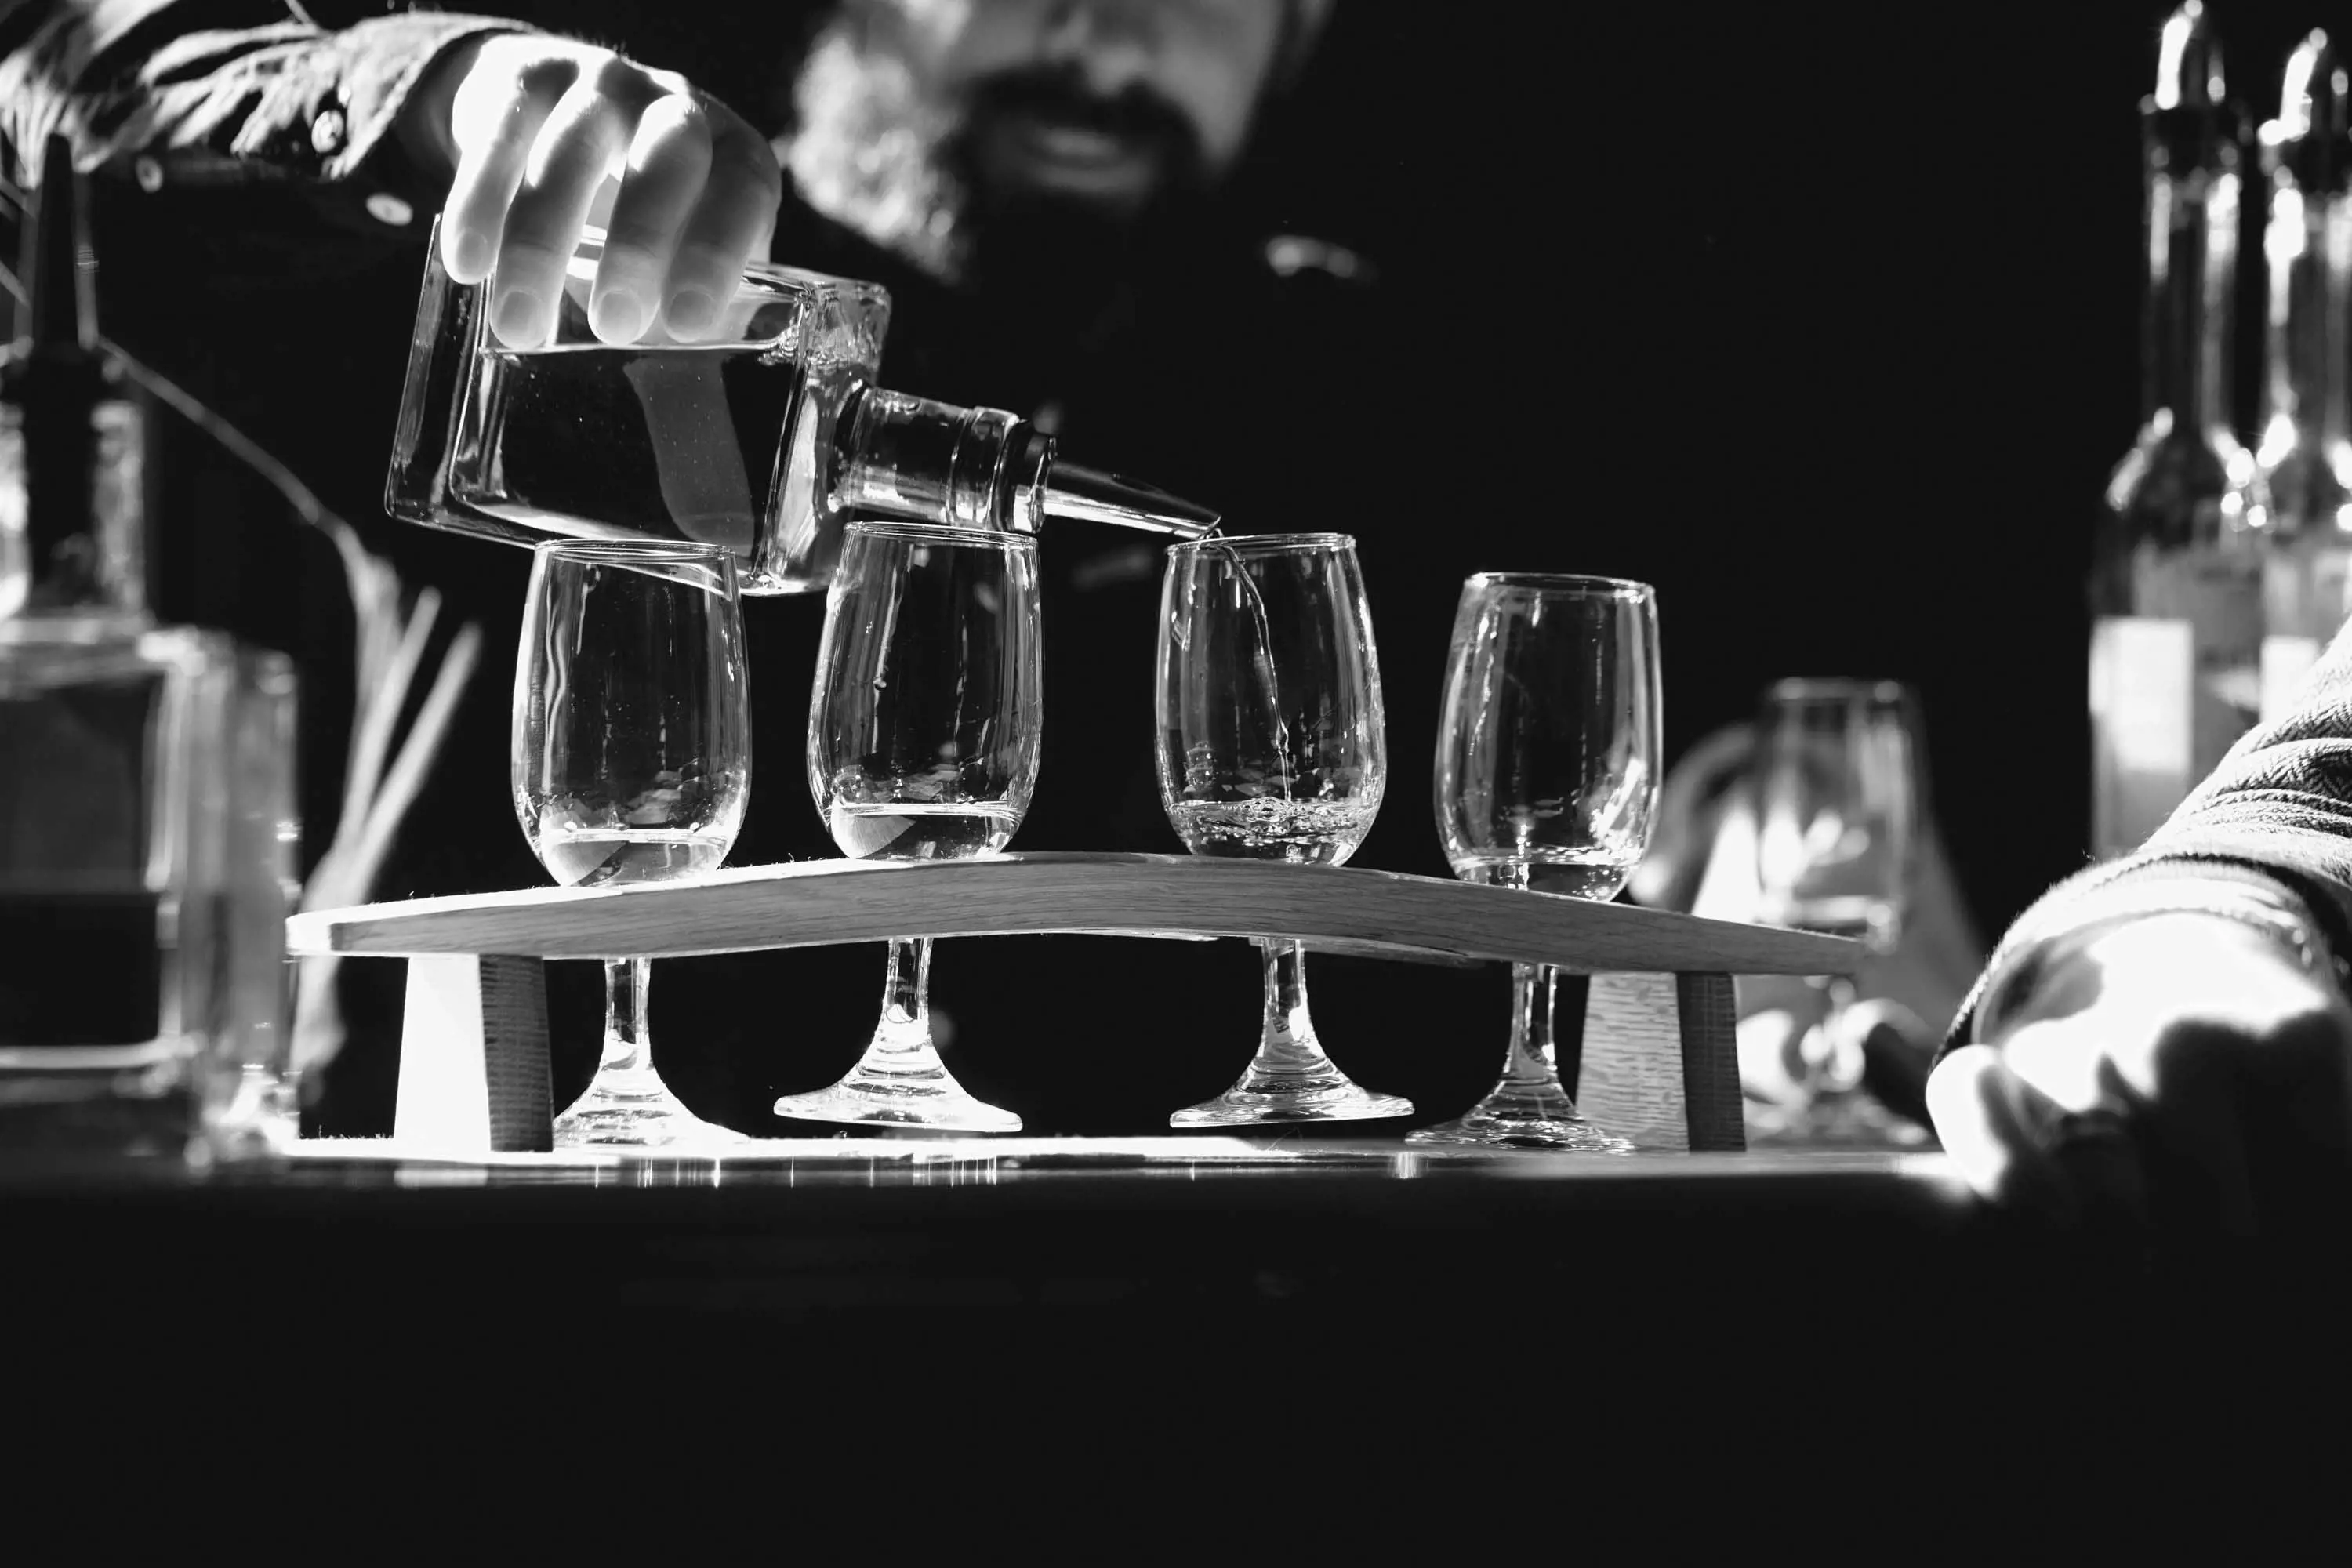 A man with a beard pours whisky from a bottle into a flight of four, tall glasses cradled in a wooden holder.